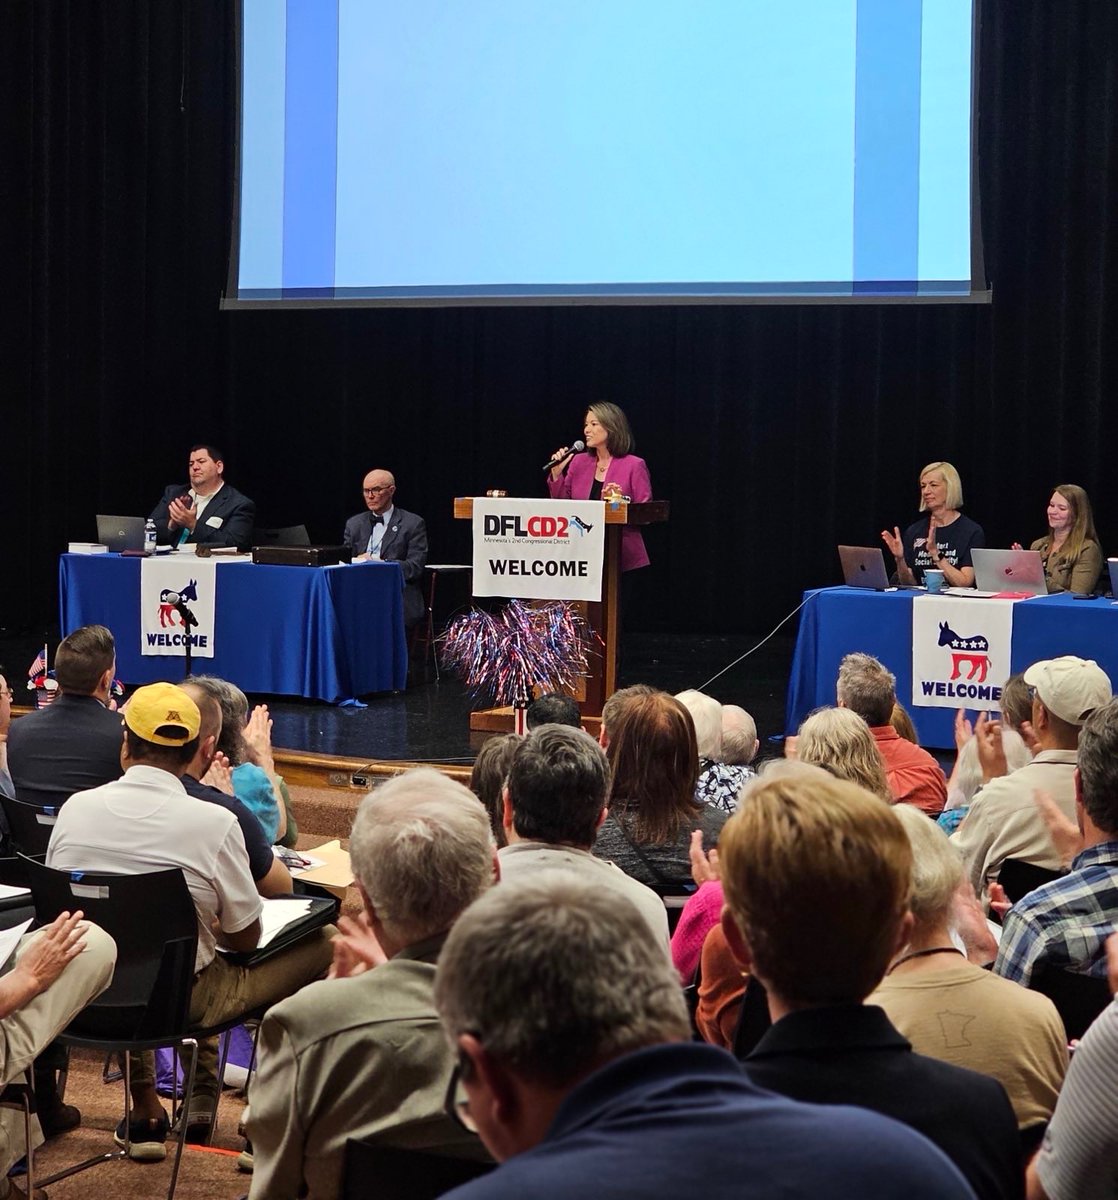 Thank you to all the delegates at today’s #MN02 DFL Convention for the trust you continue to place in me. I’m proud to have earned your endorsement, and I’m energized to take the fight to MAGA Republicans this Fall. On to November!